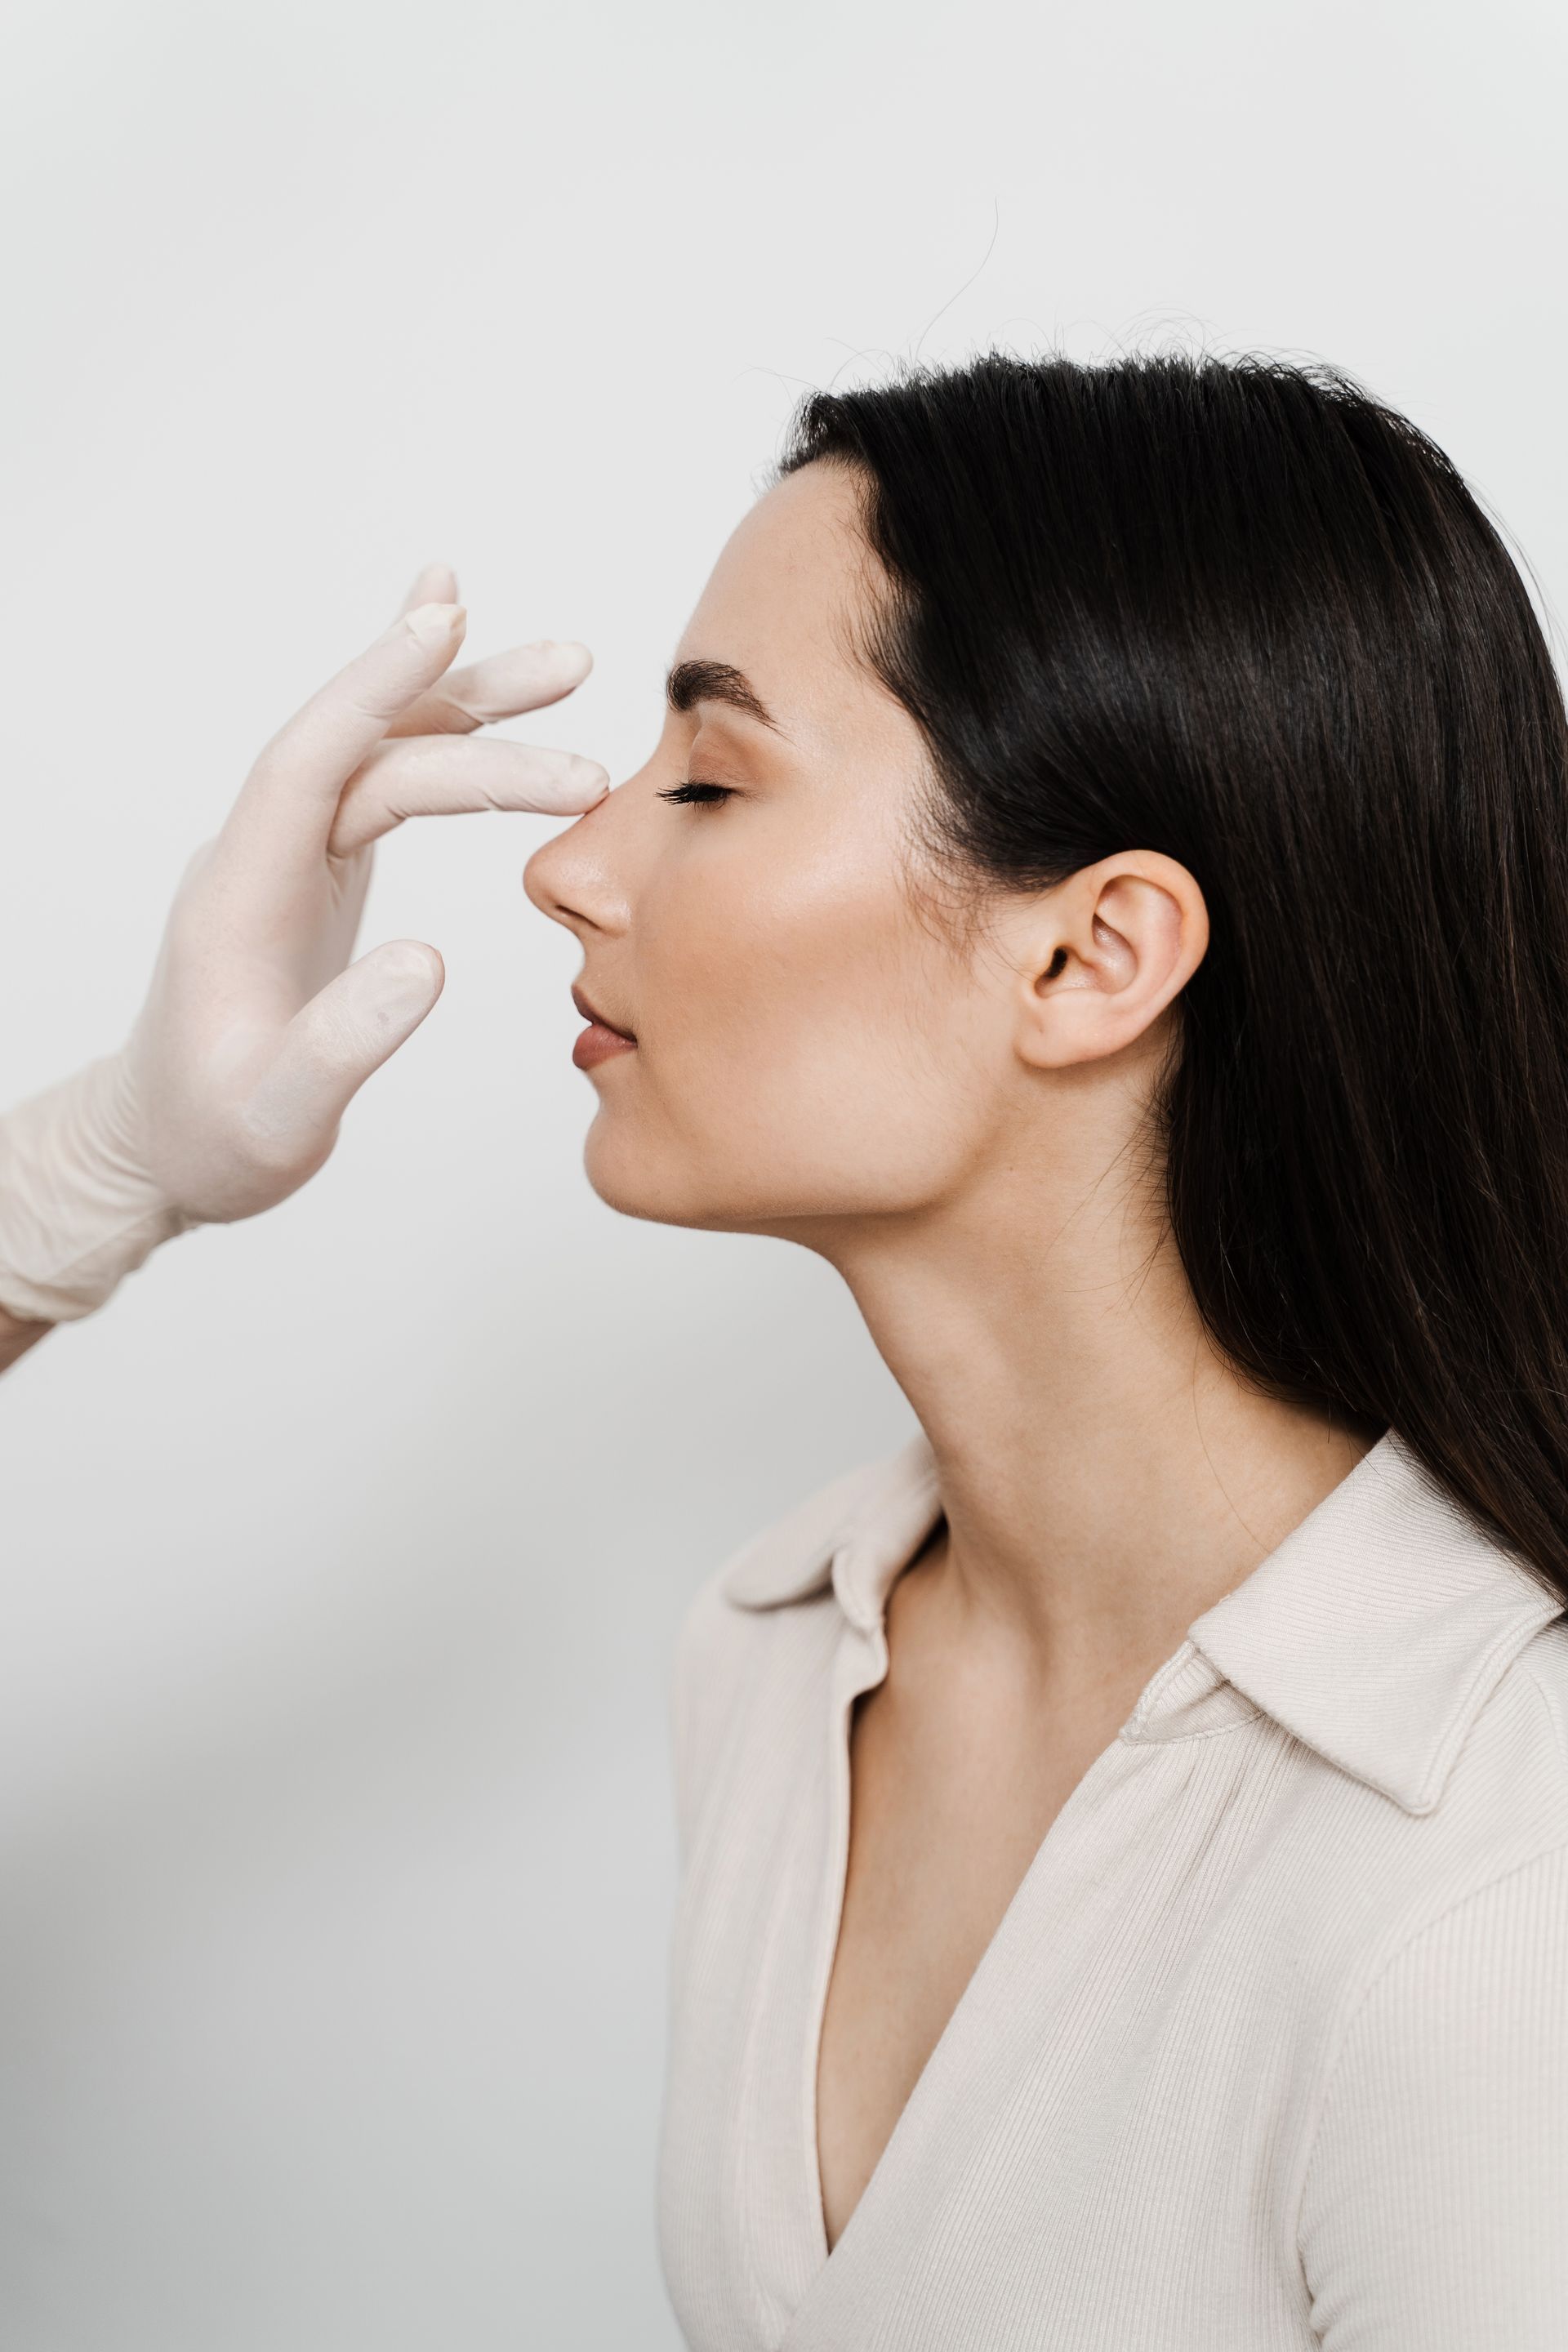 a woman is getting her nose examined by a doctor .